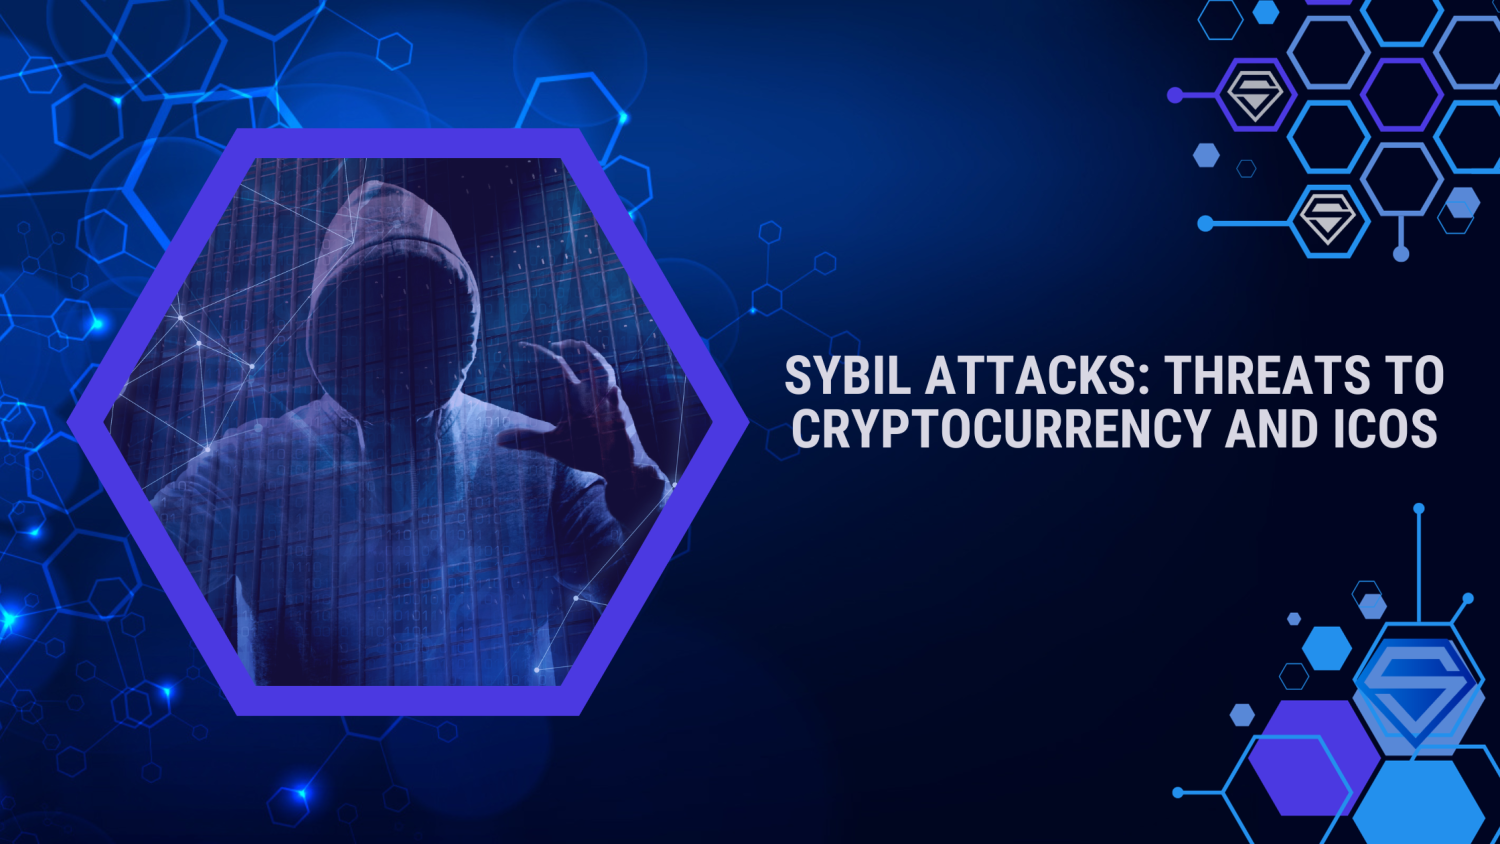 What is Sybil Attacks? Why is it a Threat to Cryptocurrency and ICOs?